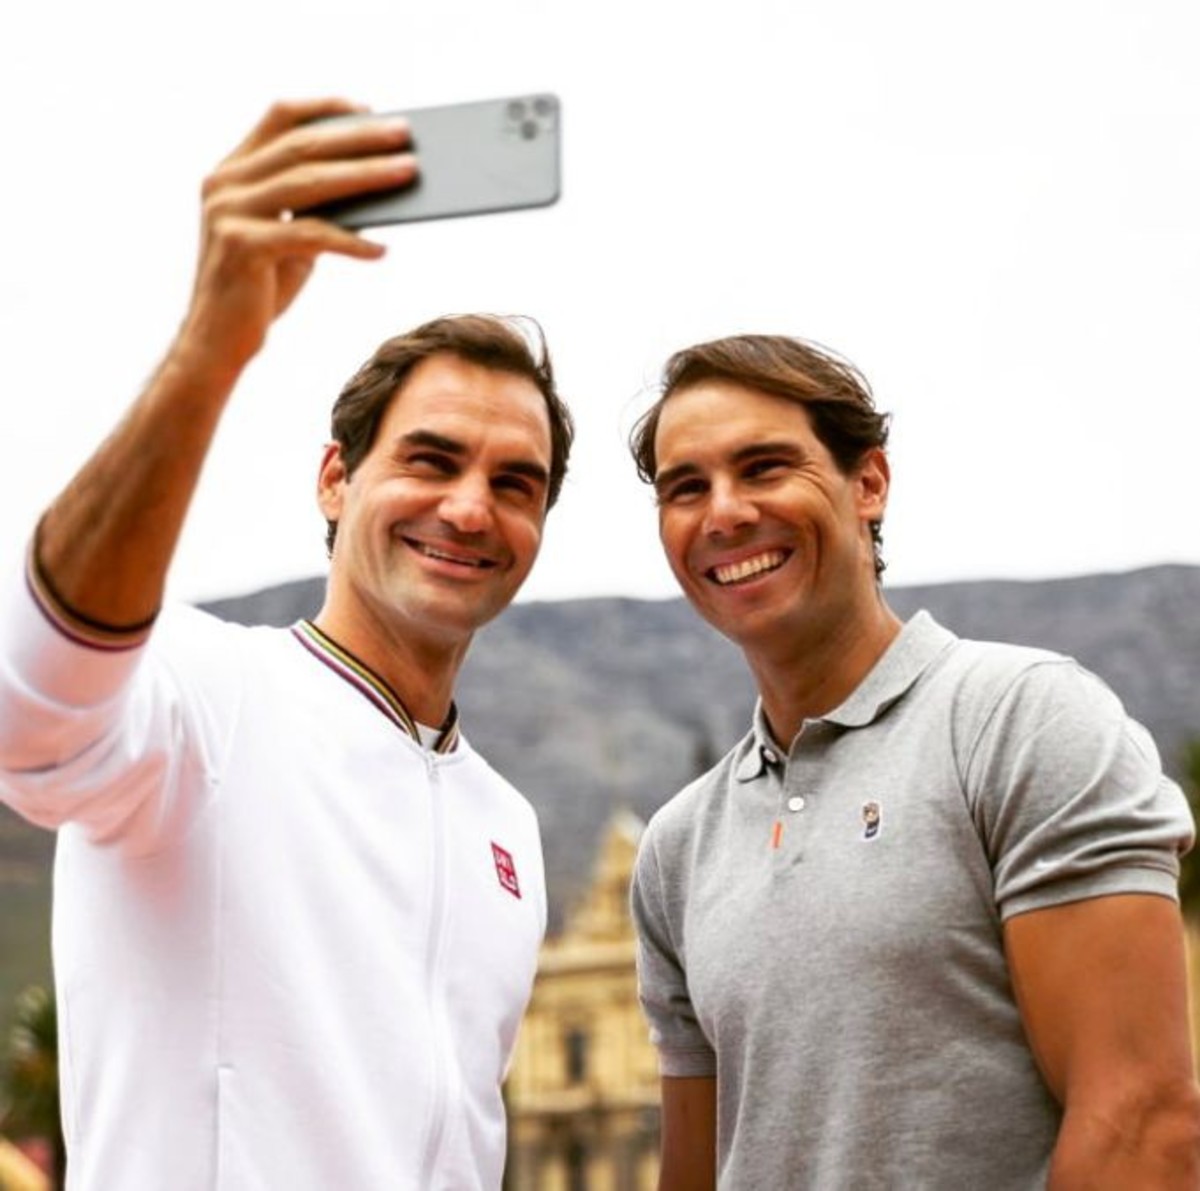 15 Amazing Facts About Rafael Nadal